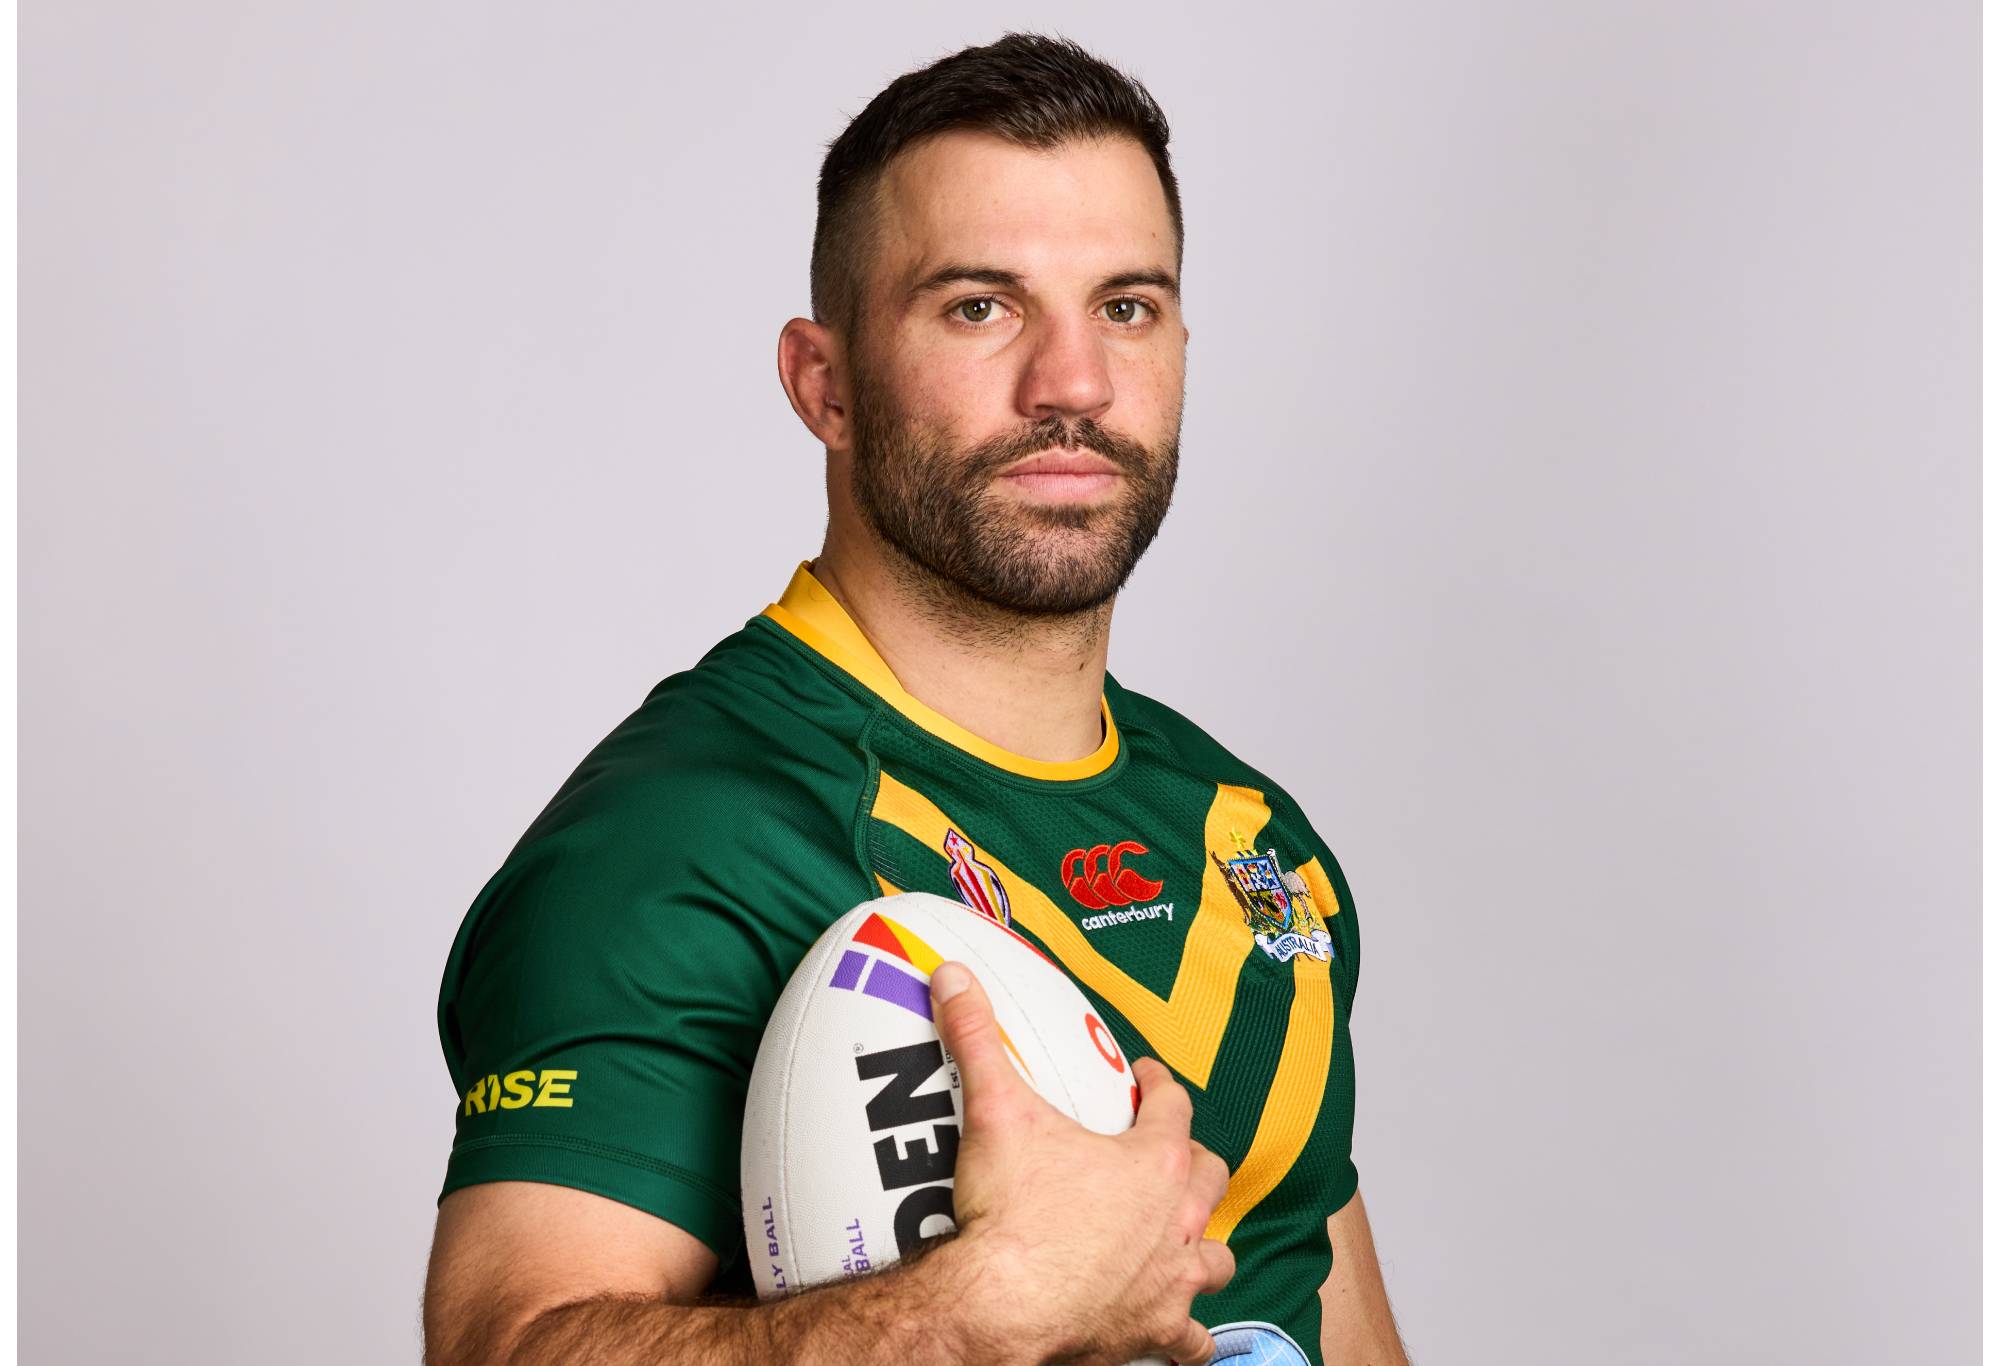 MANCHESTER, ENGLAND - OCTOBER 10: James Tedesco of Australia poses for a photo during the Australia Rugby League World Cup portrait session on October 10, 2022 in Manchester, England. (Photo by Karl Bridgeman/Getty Images for Rugby League World Cup)